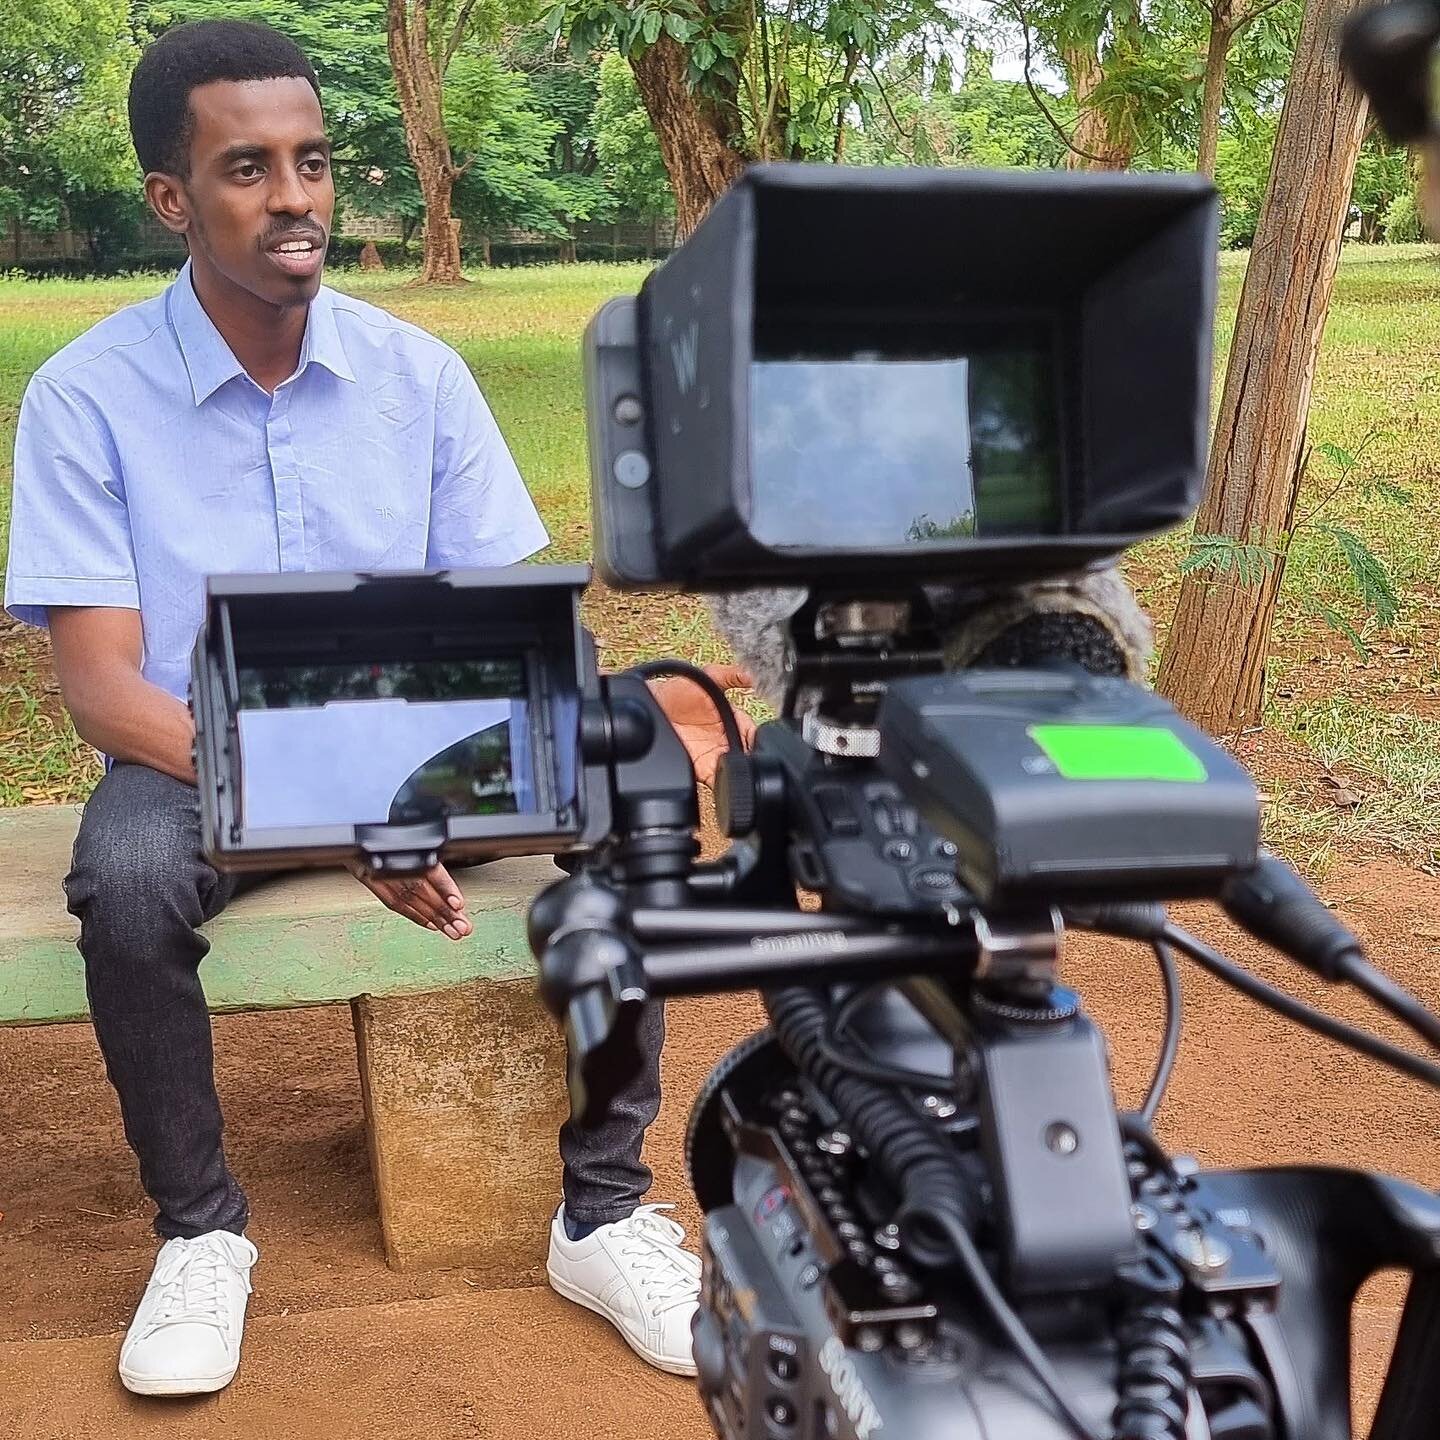 Our first interview in Tanzania with @el_gameedoh.
Ghaamid Abdulbasat is a National Geographic Explorer, climate activist, and the earthday.org Sub Saharan Africa Regional Co-Director leading the Mahale Ecosystem Restoration project in Tanzania.

He 